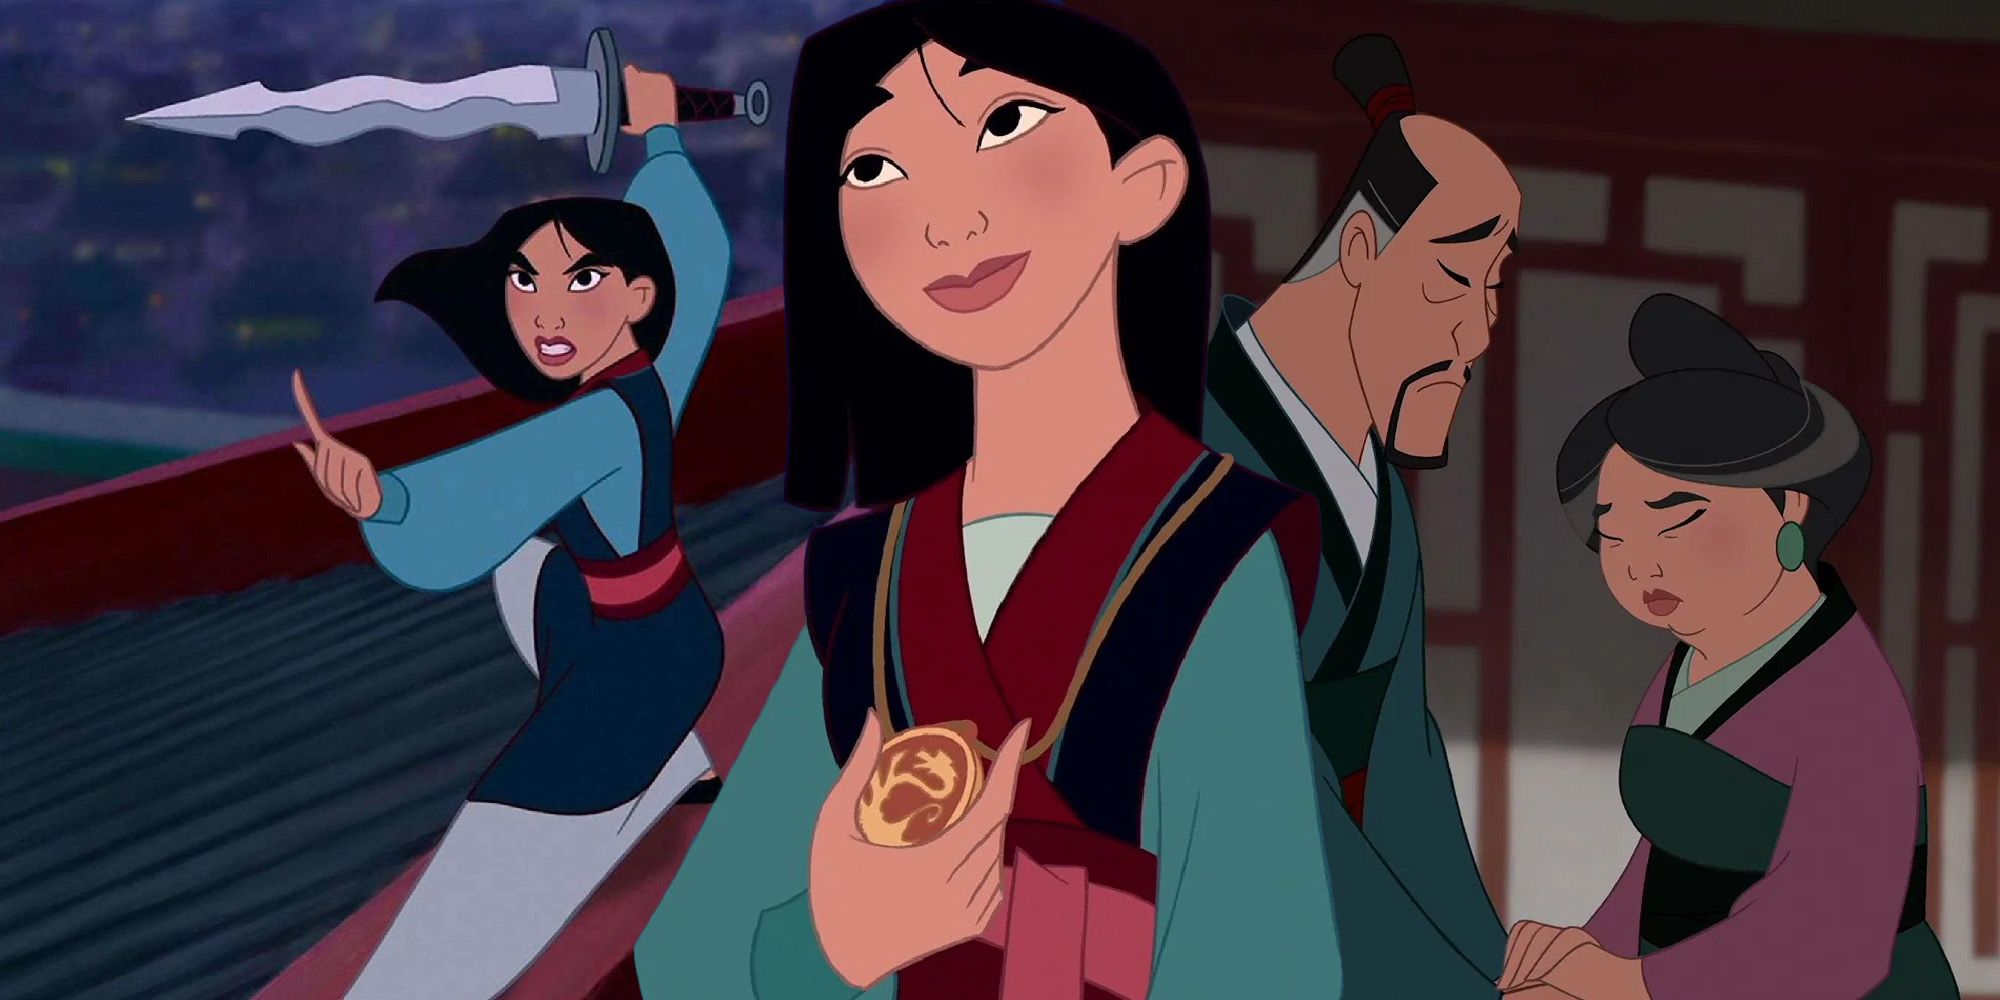 Mulan with her parents in the original animated Disney film.